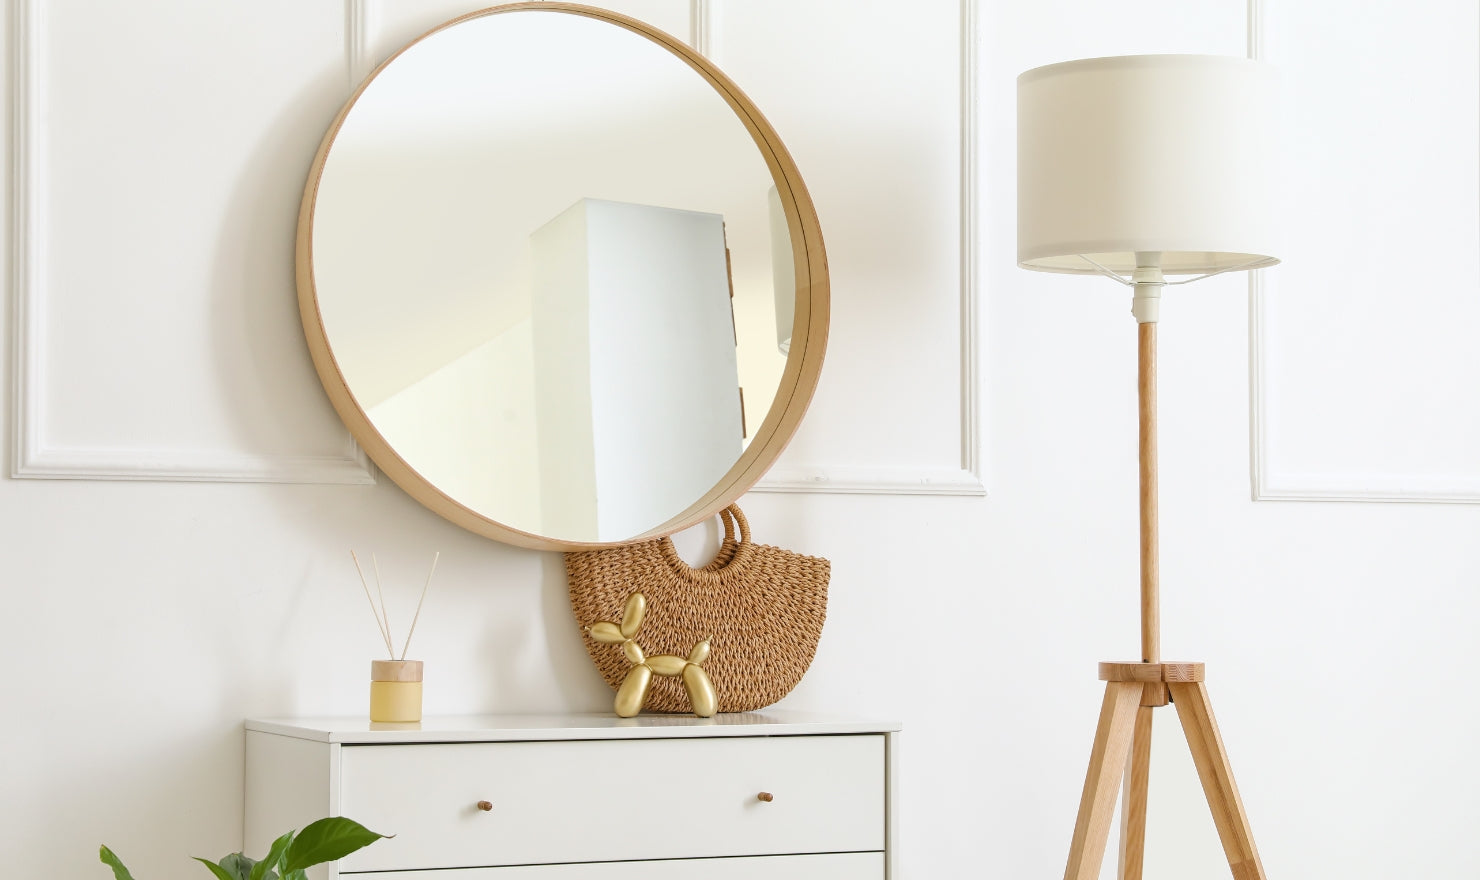 Place Mirrors On The Wall For Depth And Elegance